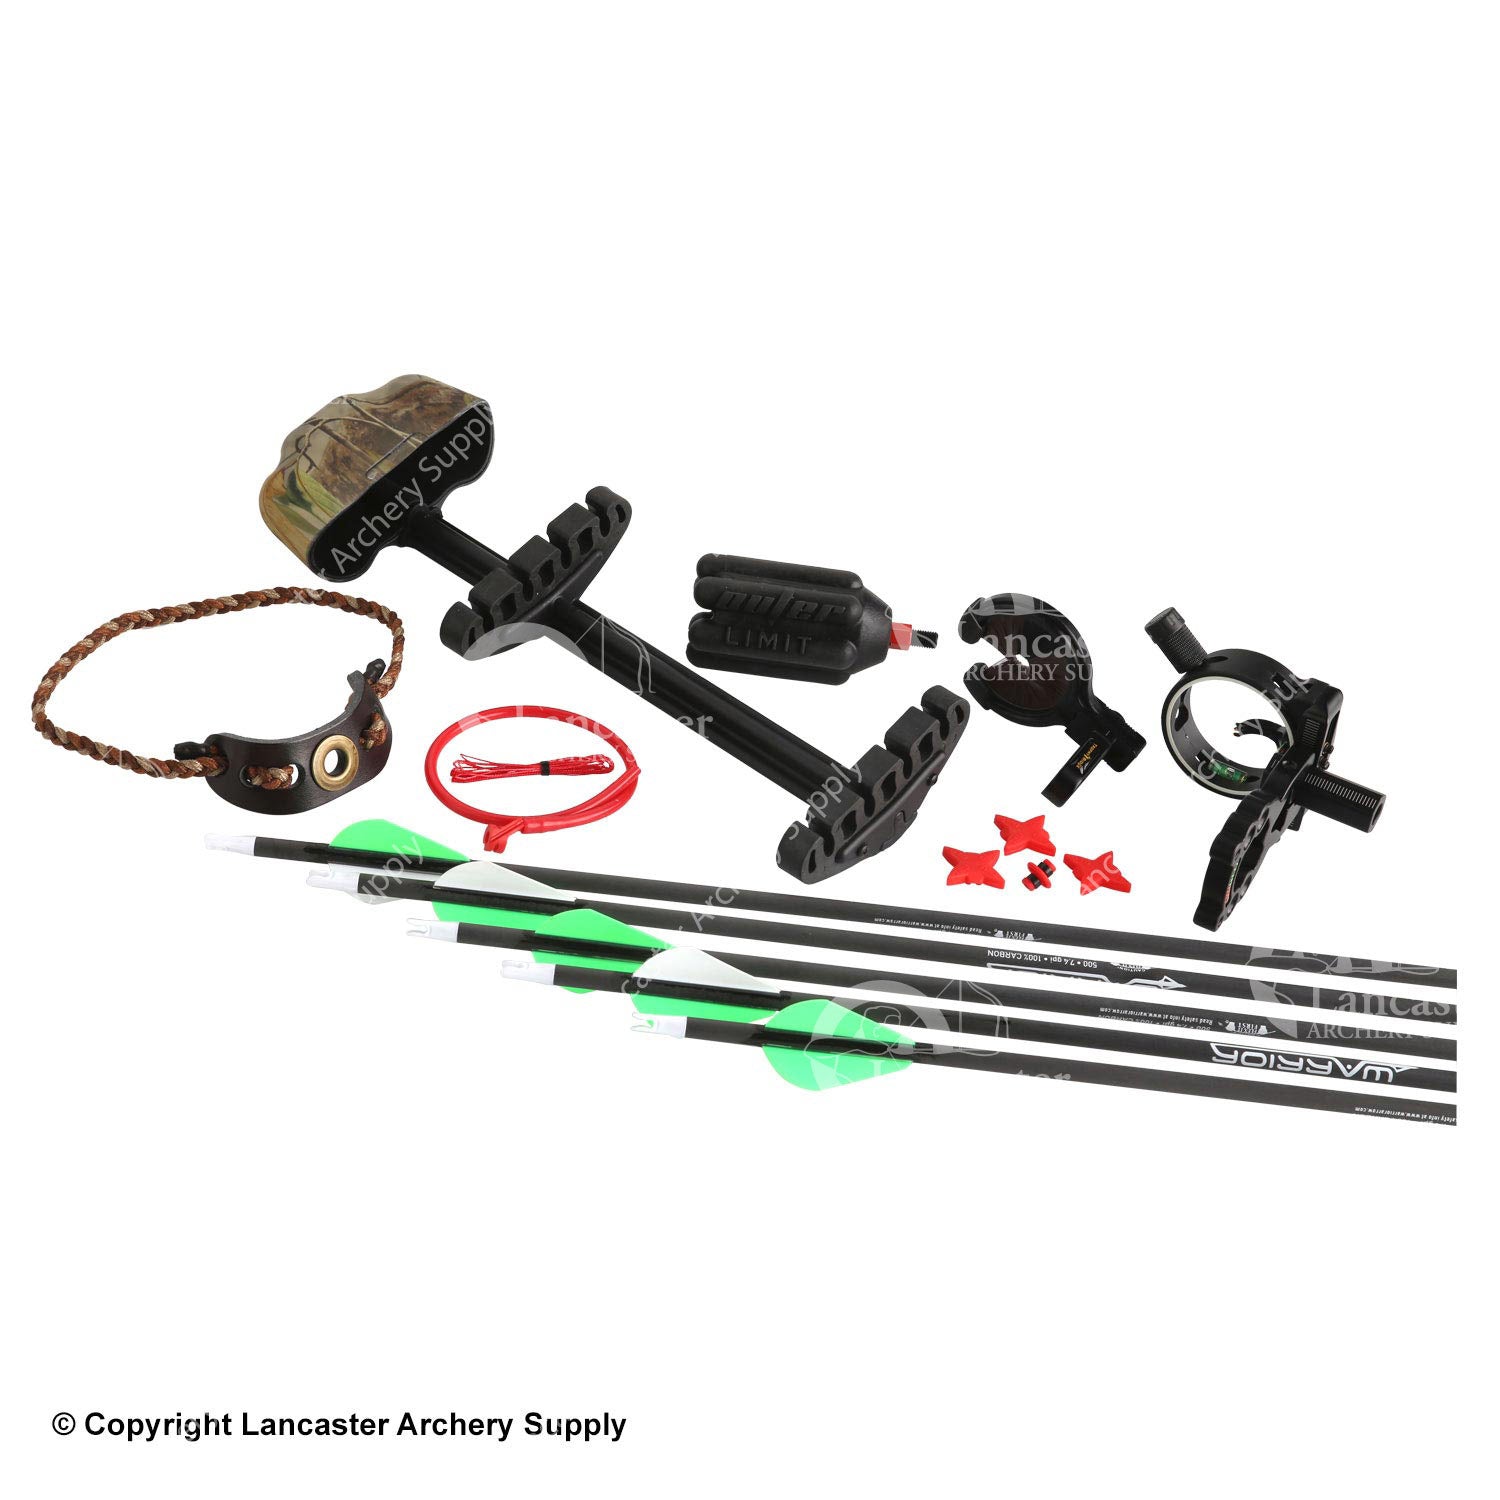 LAS Compound Bow Package (Whisker Biscuit)